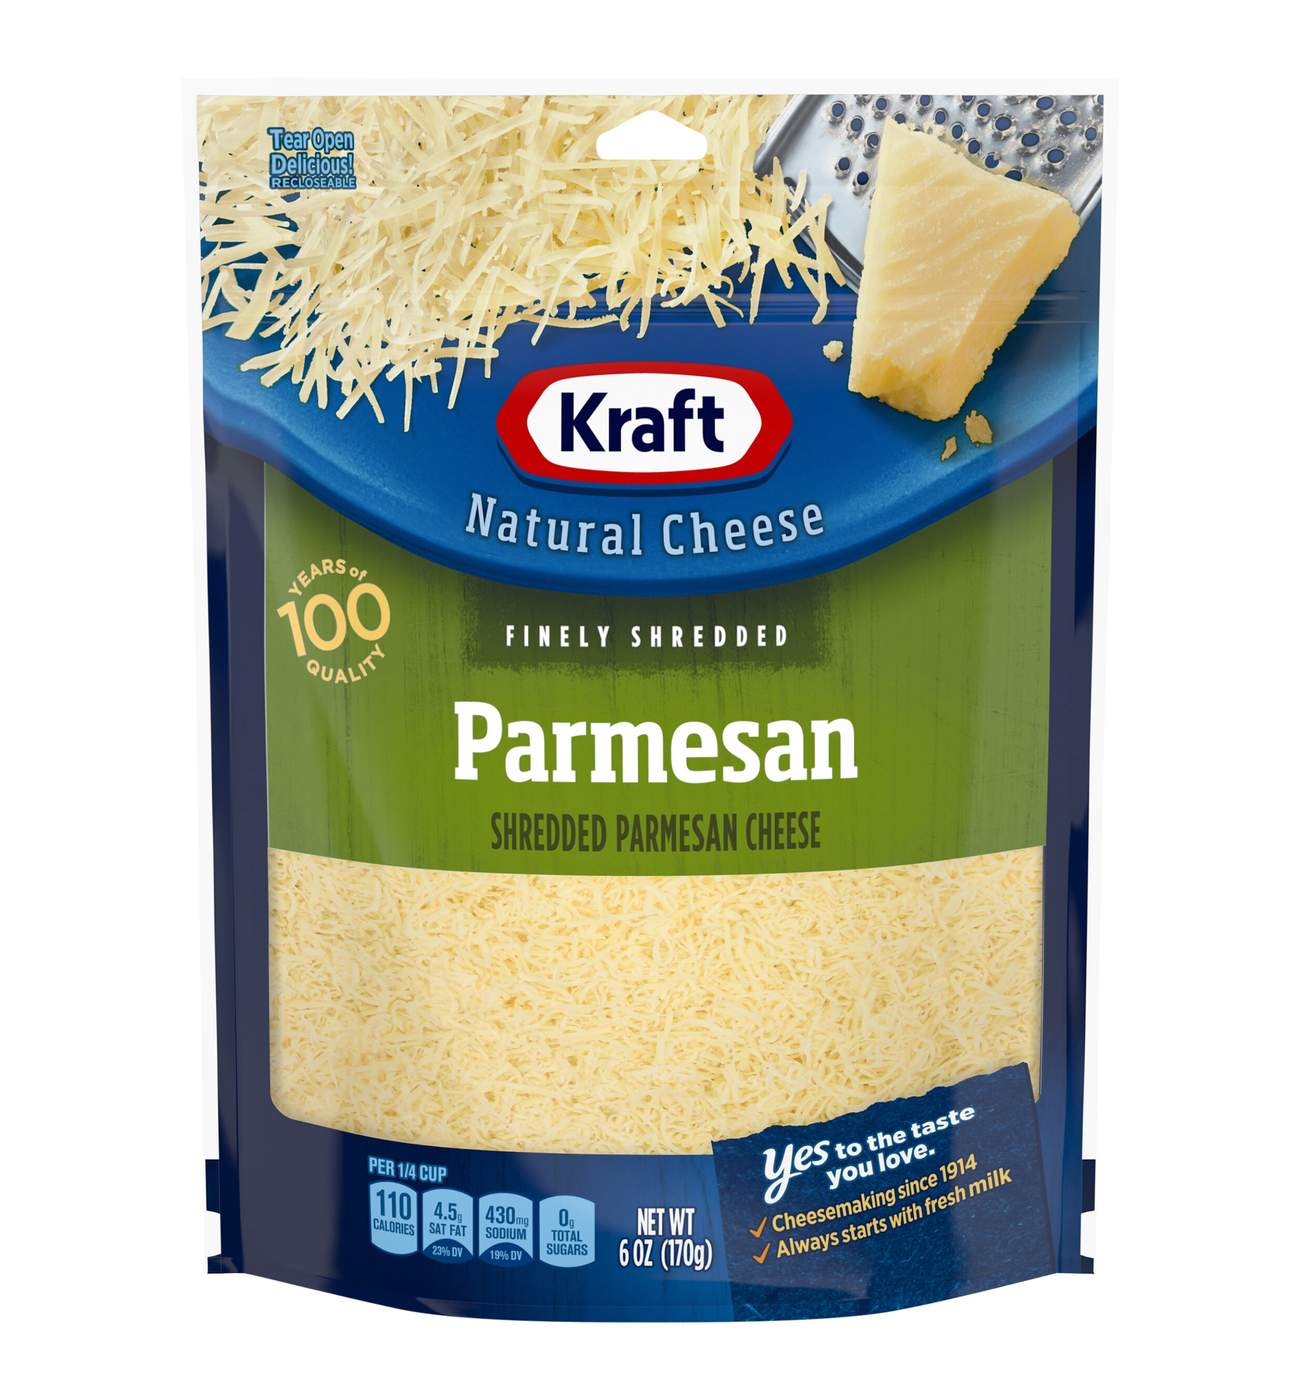 Kraft Parmesan Finely Shredded Cheese; image 1 of 4